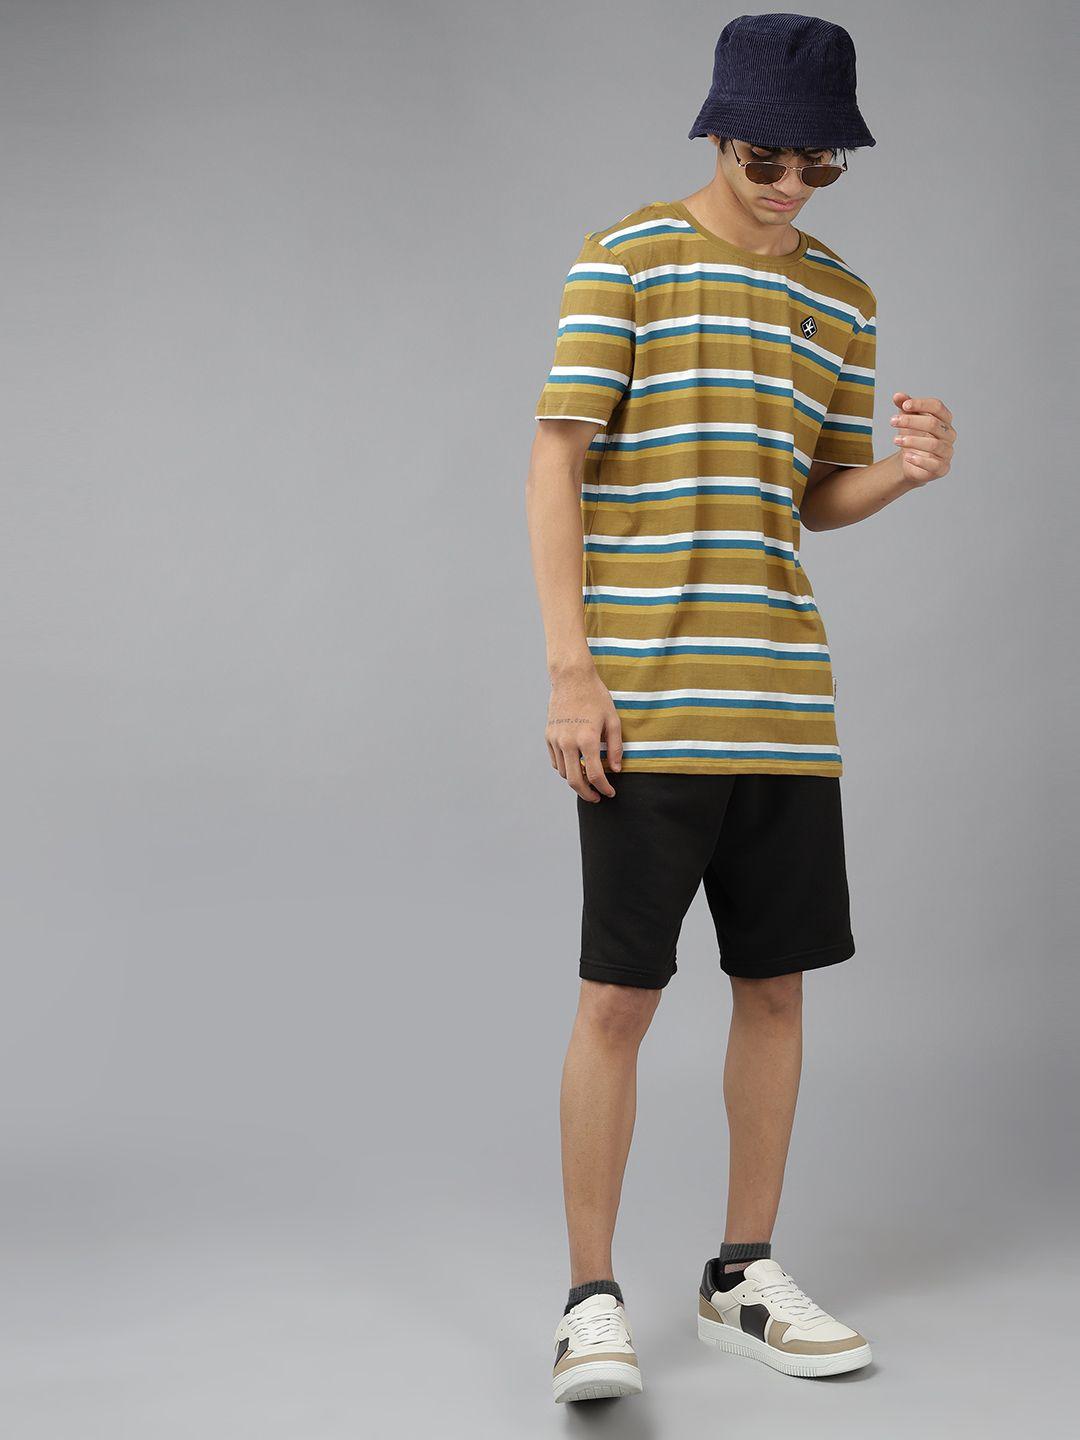 uth by roadster boys yellow & teal blue striped cotton t-shirt